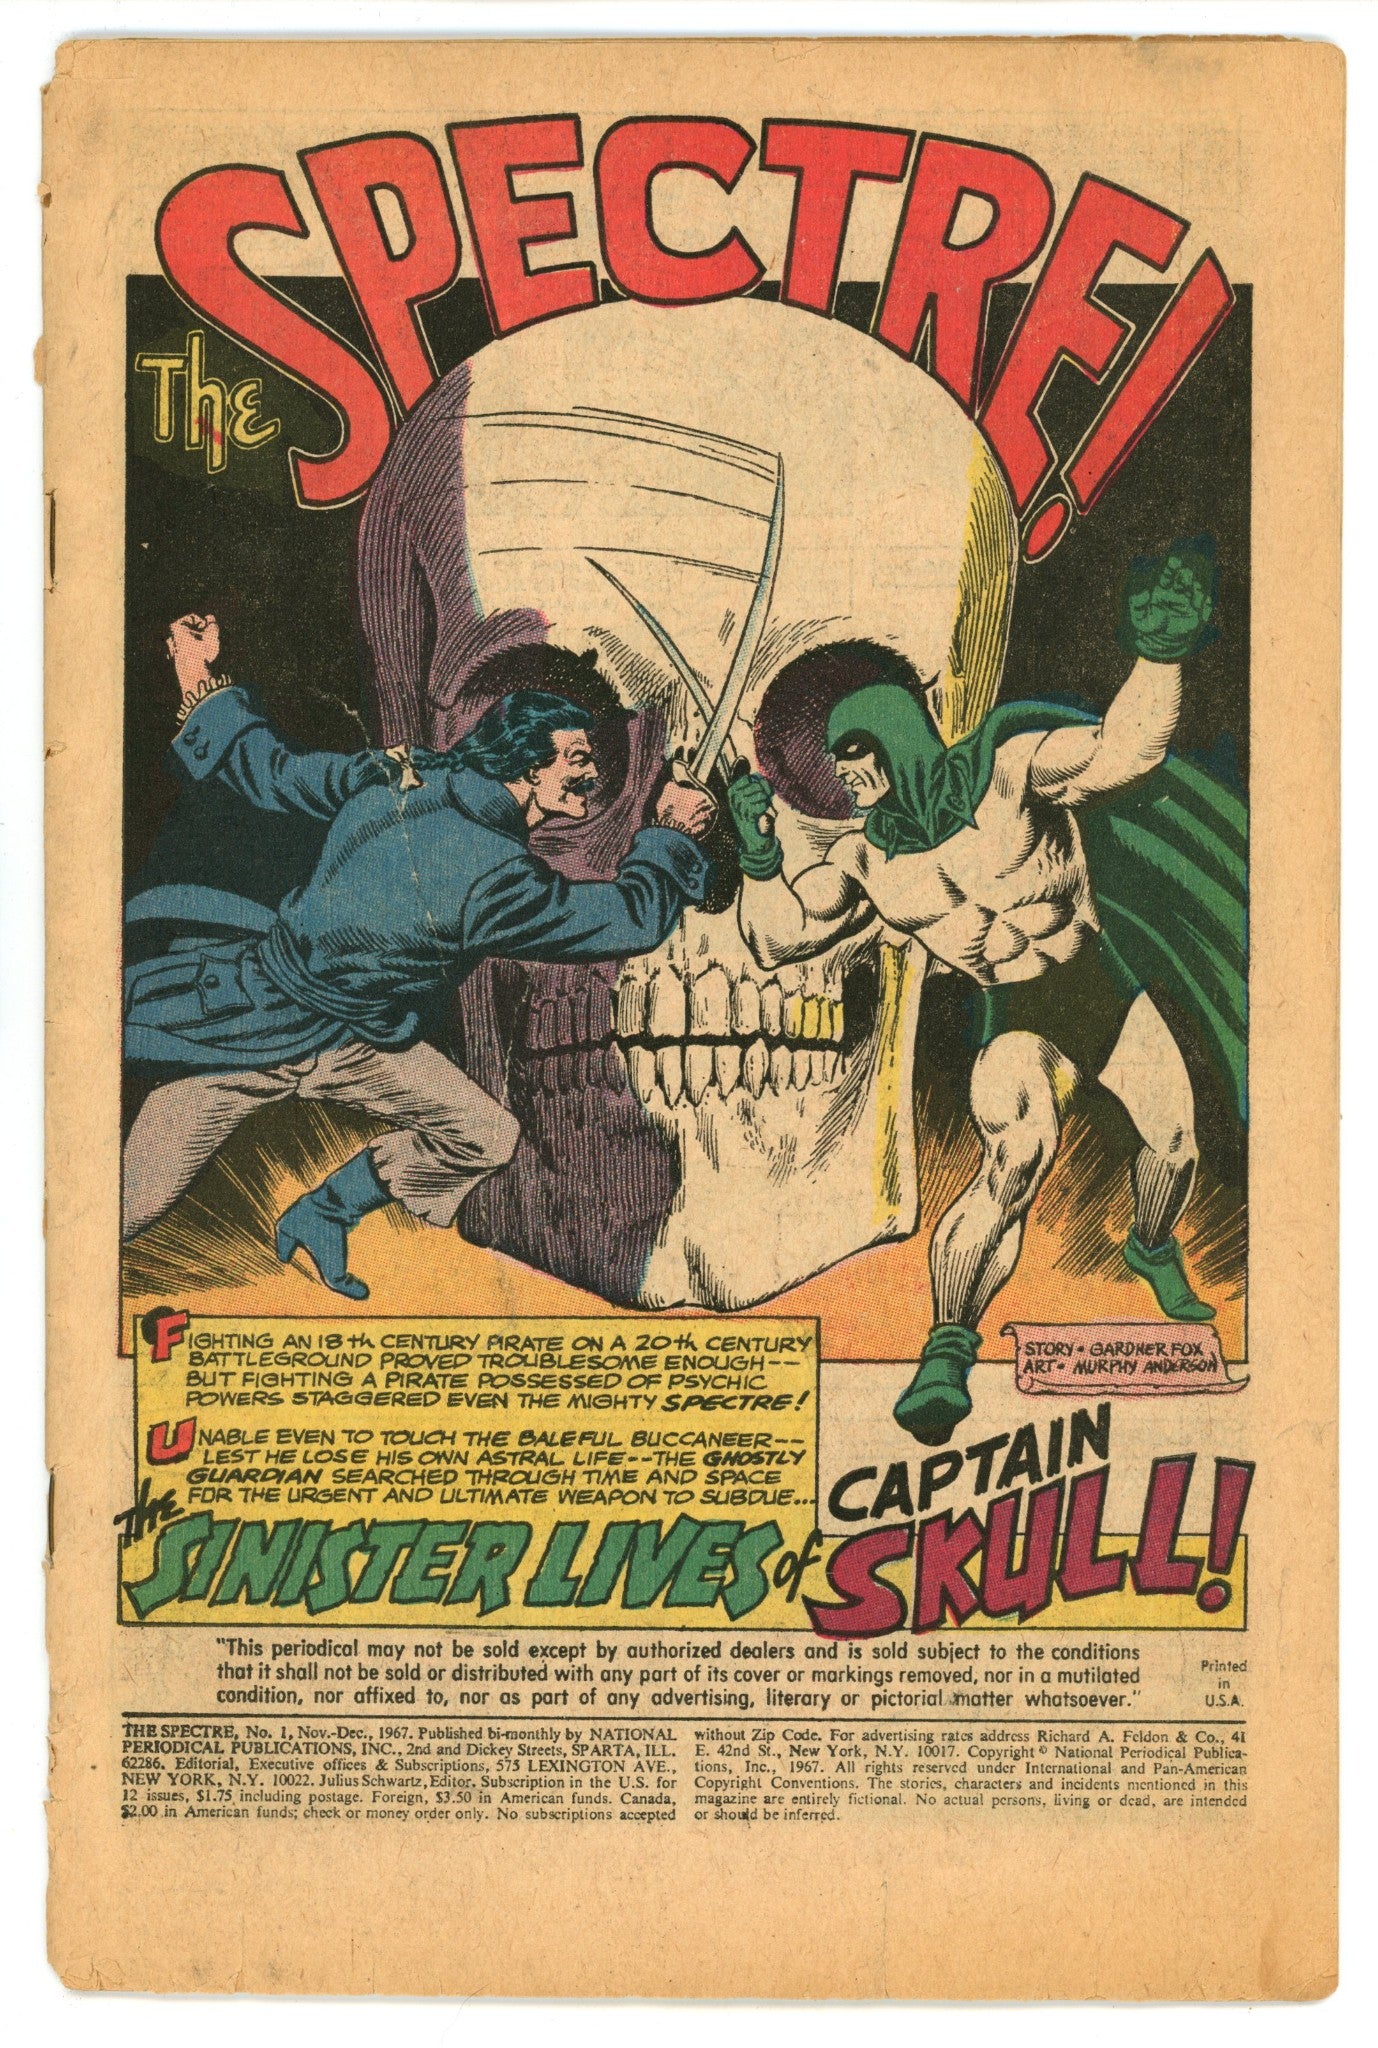 The Spectre Vol 1 1 Coverless (1967) 